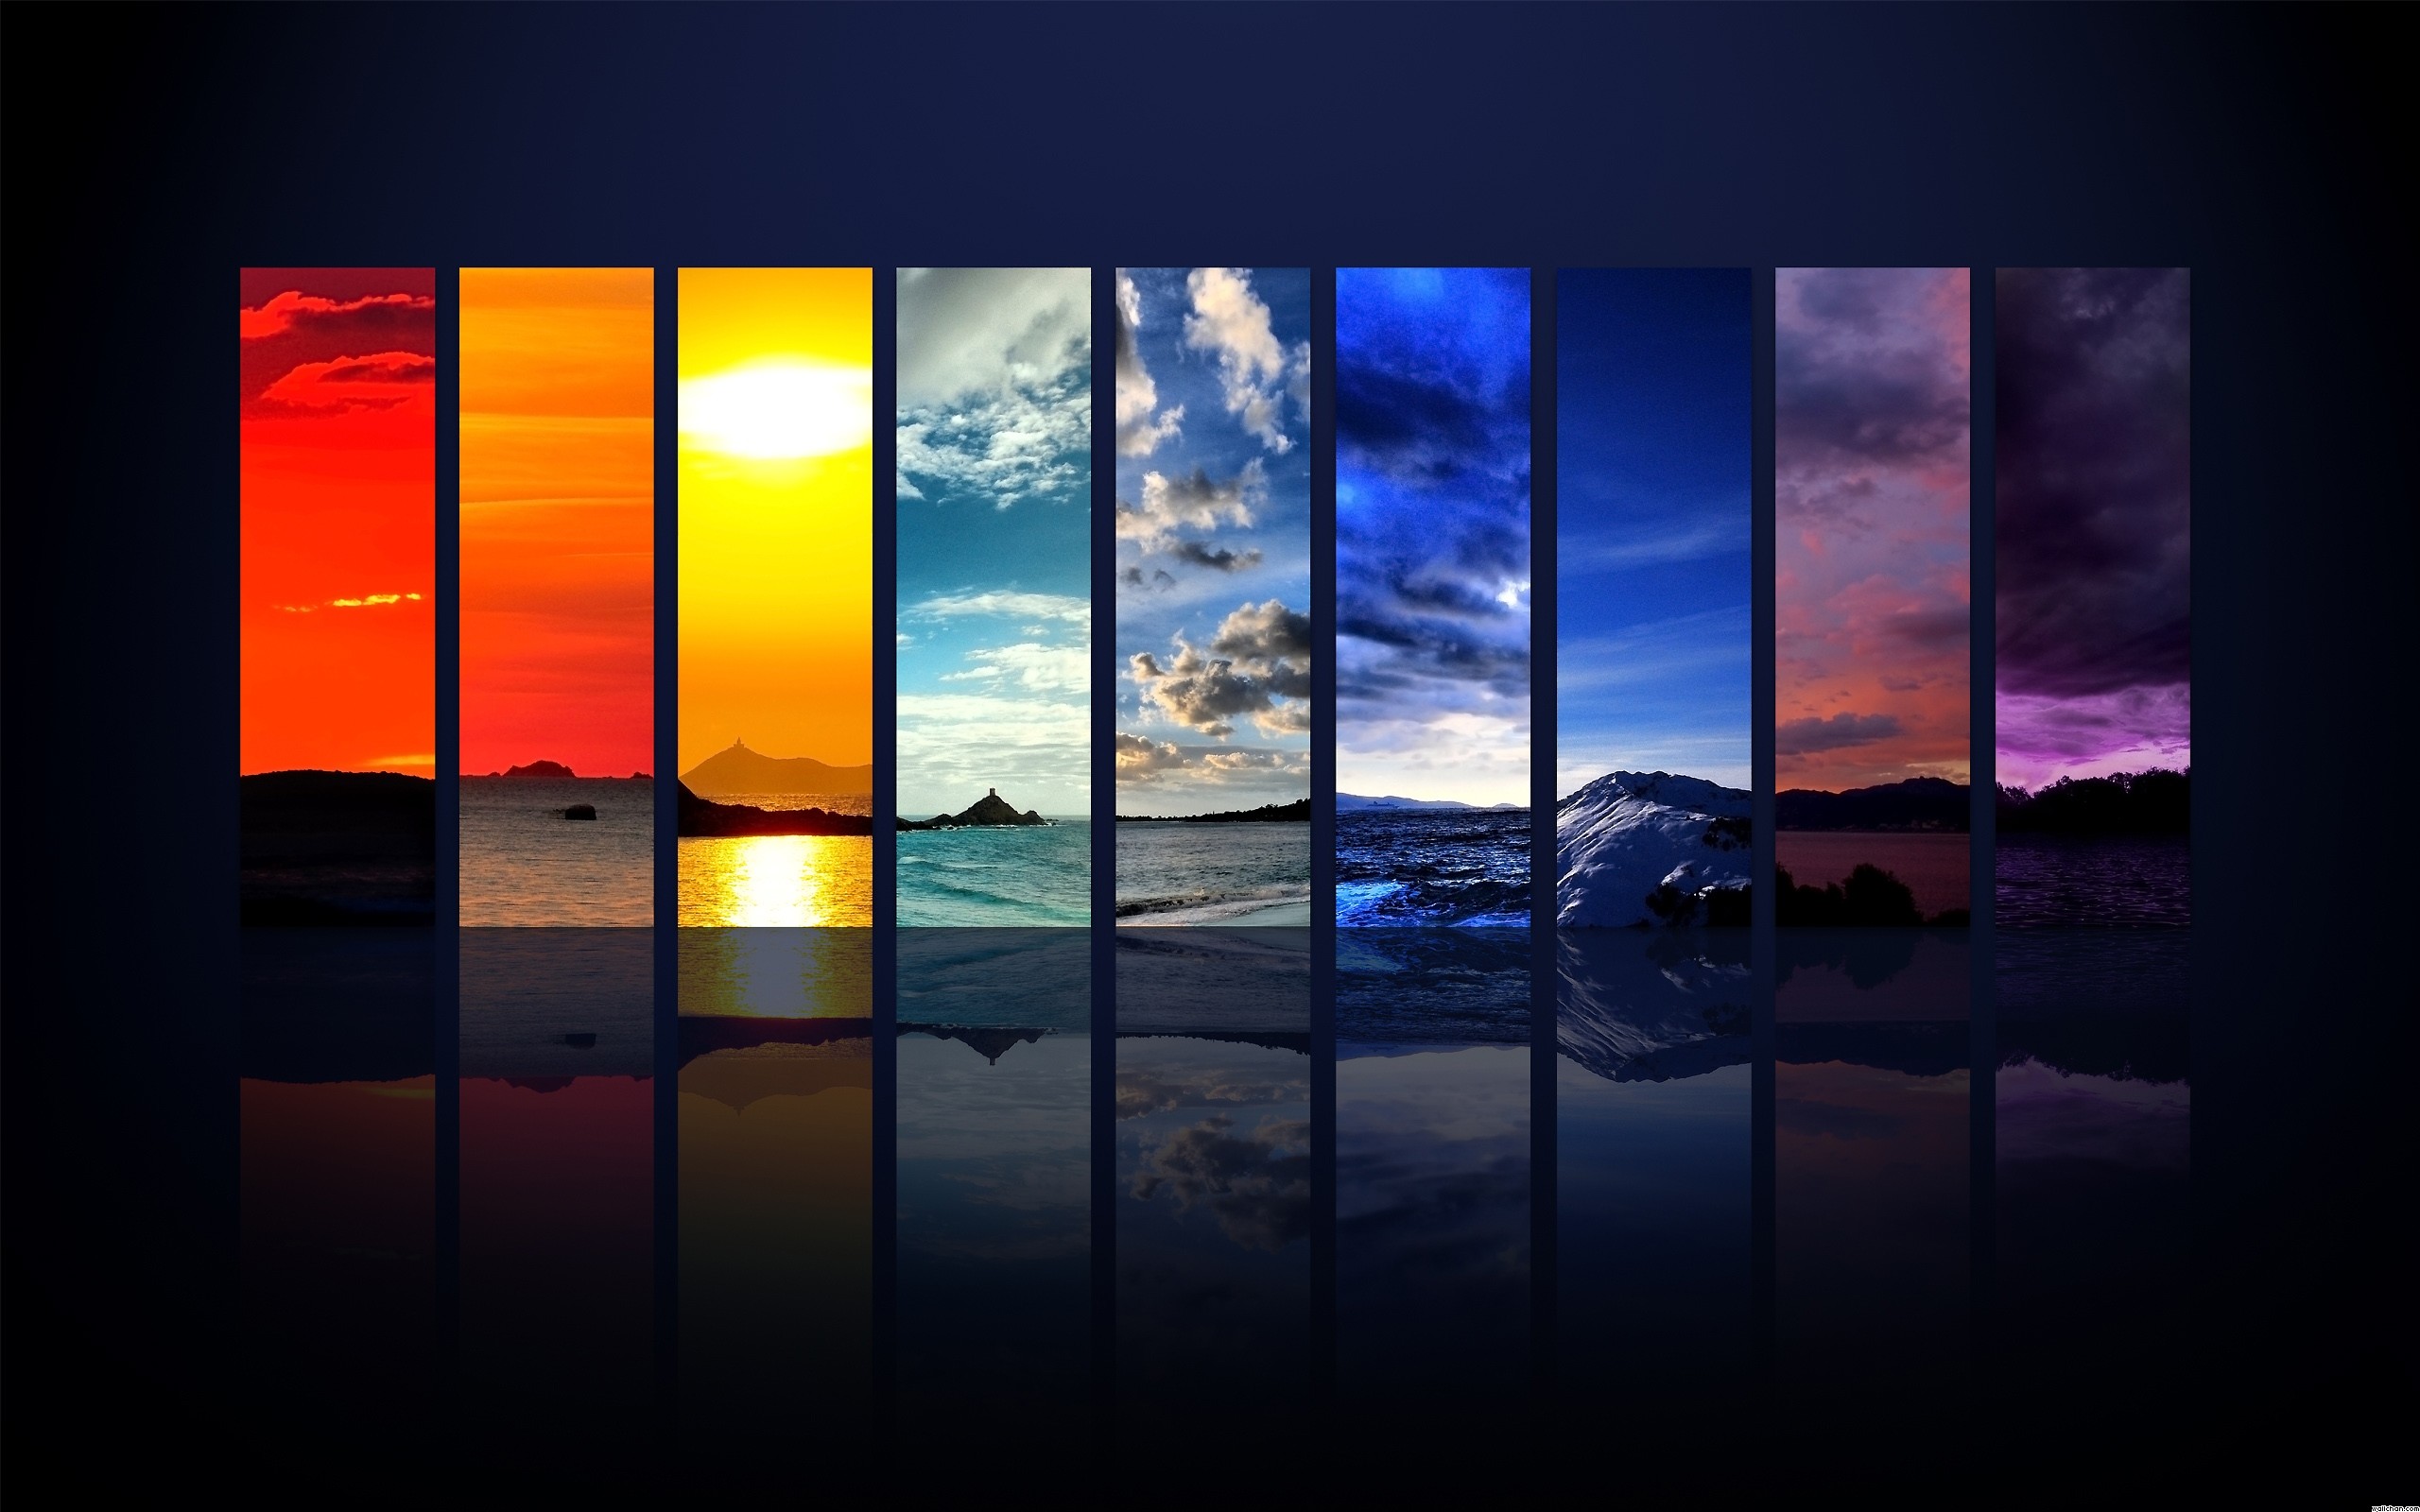 2560x1600 Wallpapers images Rainbow Colors Wallpaper HD wallpaper and background  photos